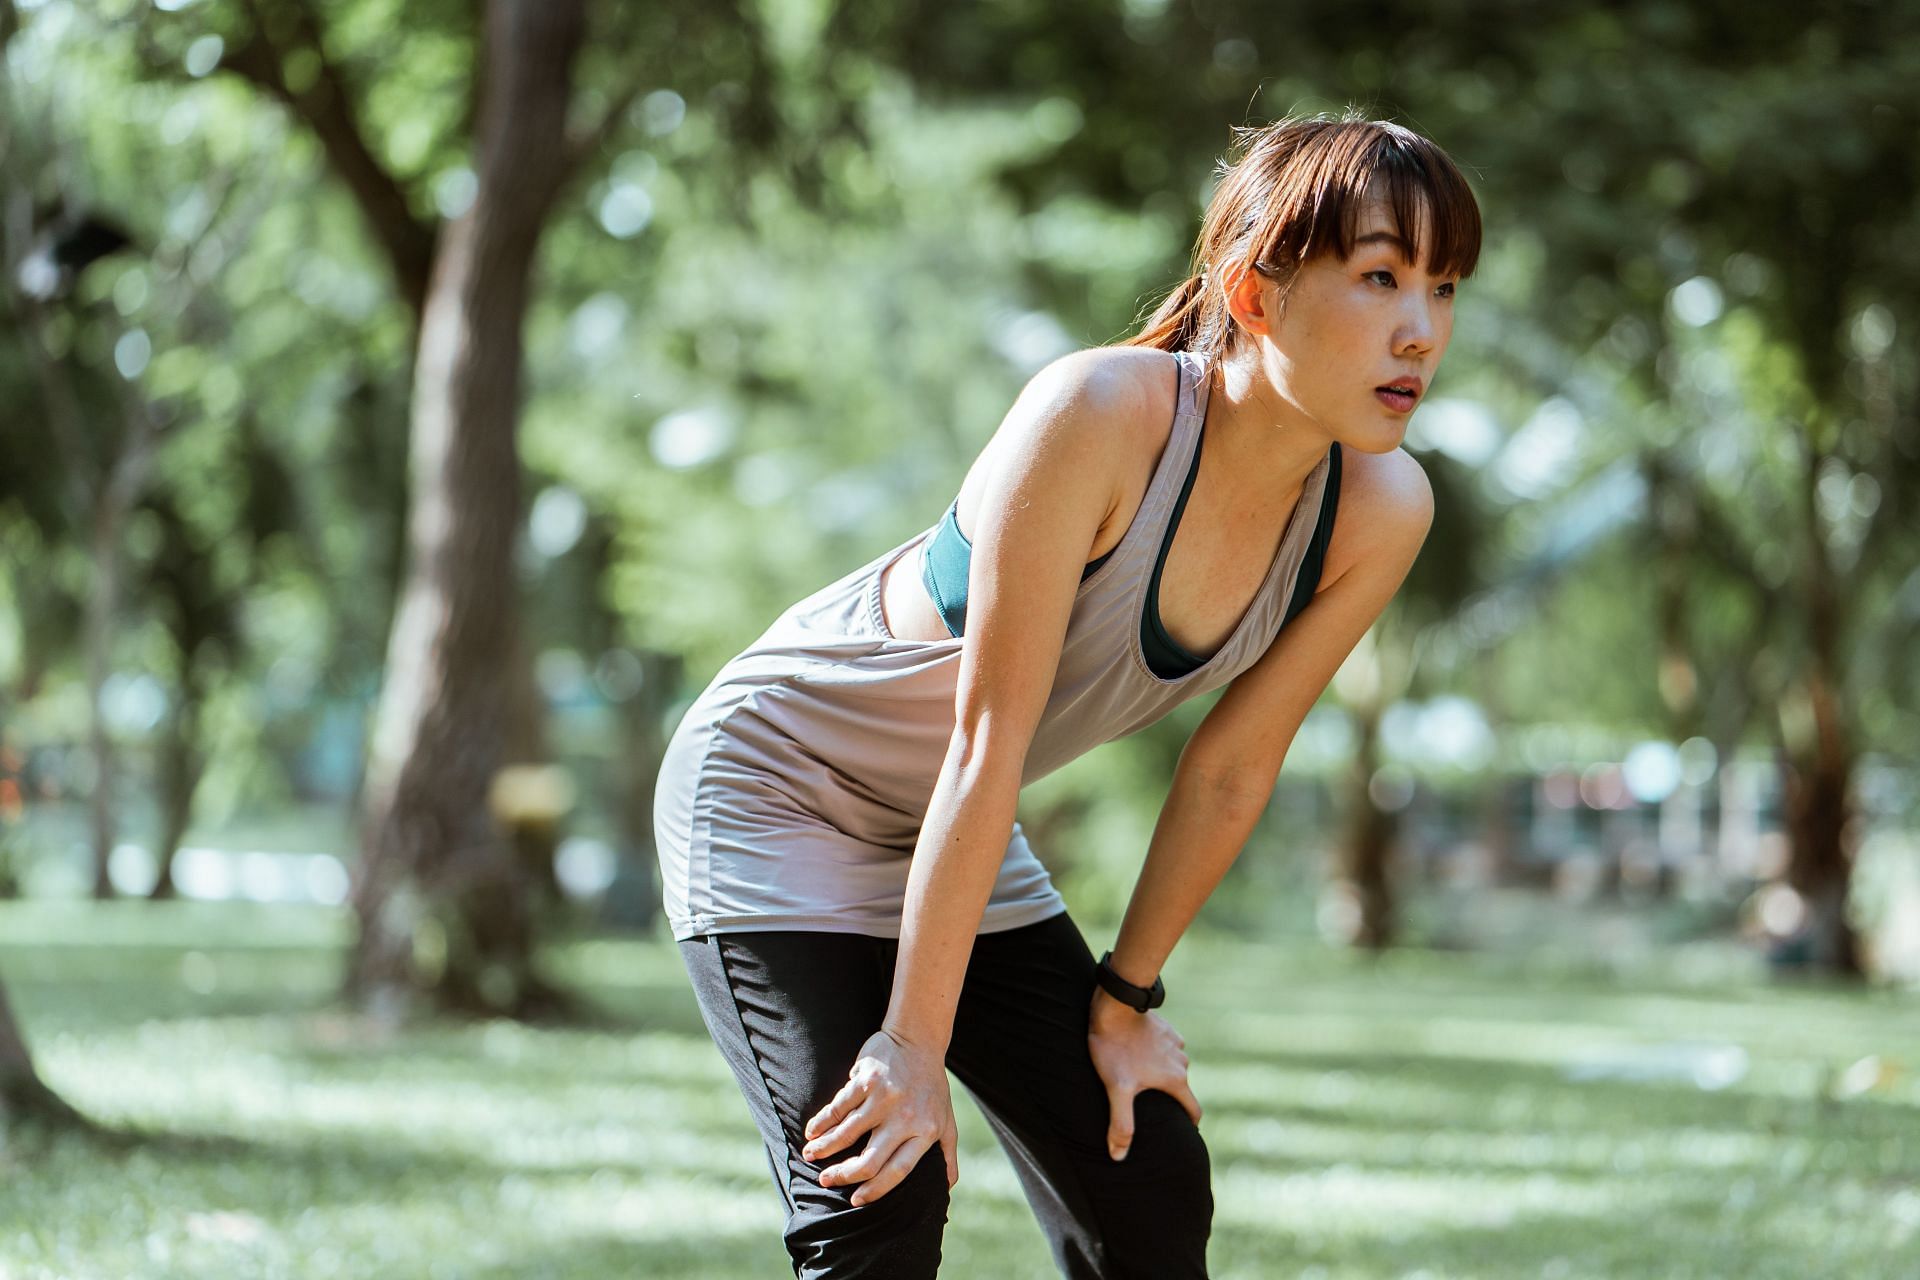  Develop lung capacity with these 7 exercises. (Image via Pexels/Ketut Subiyanto)